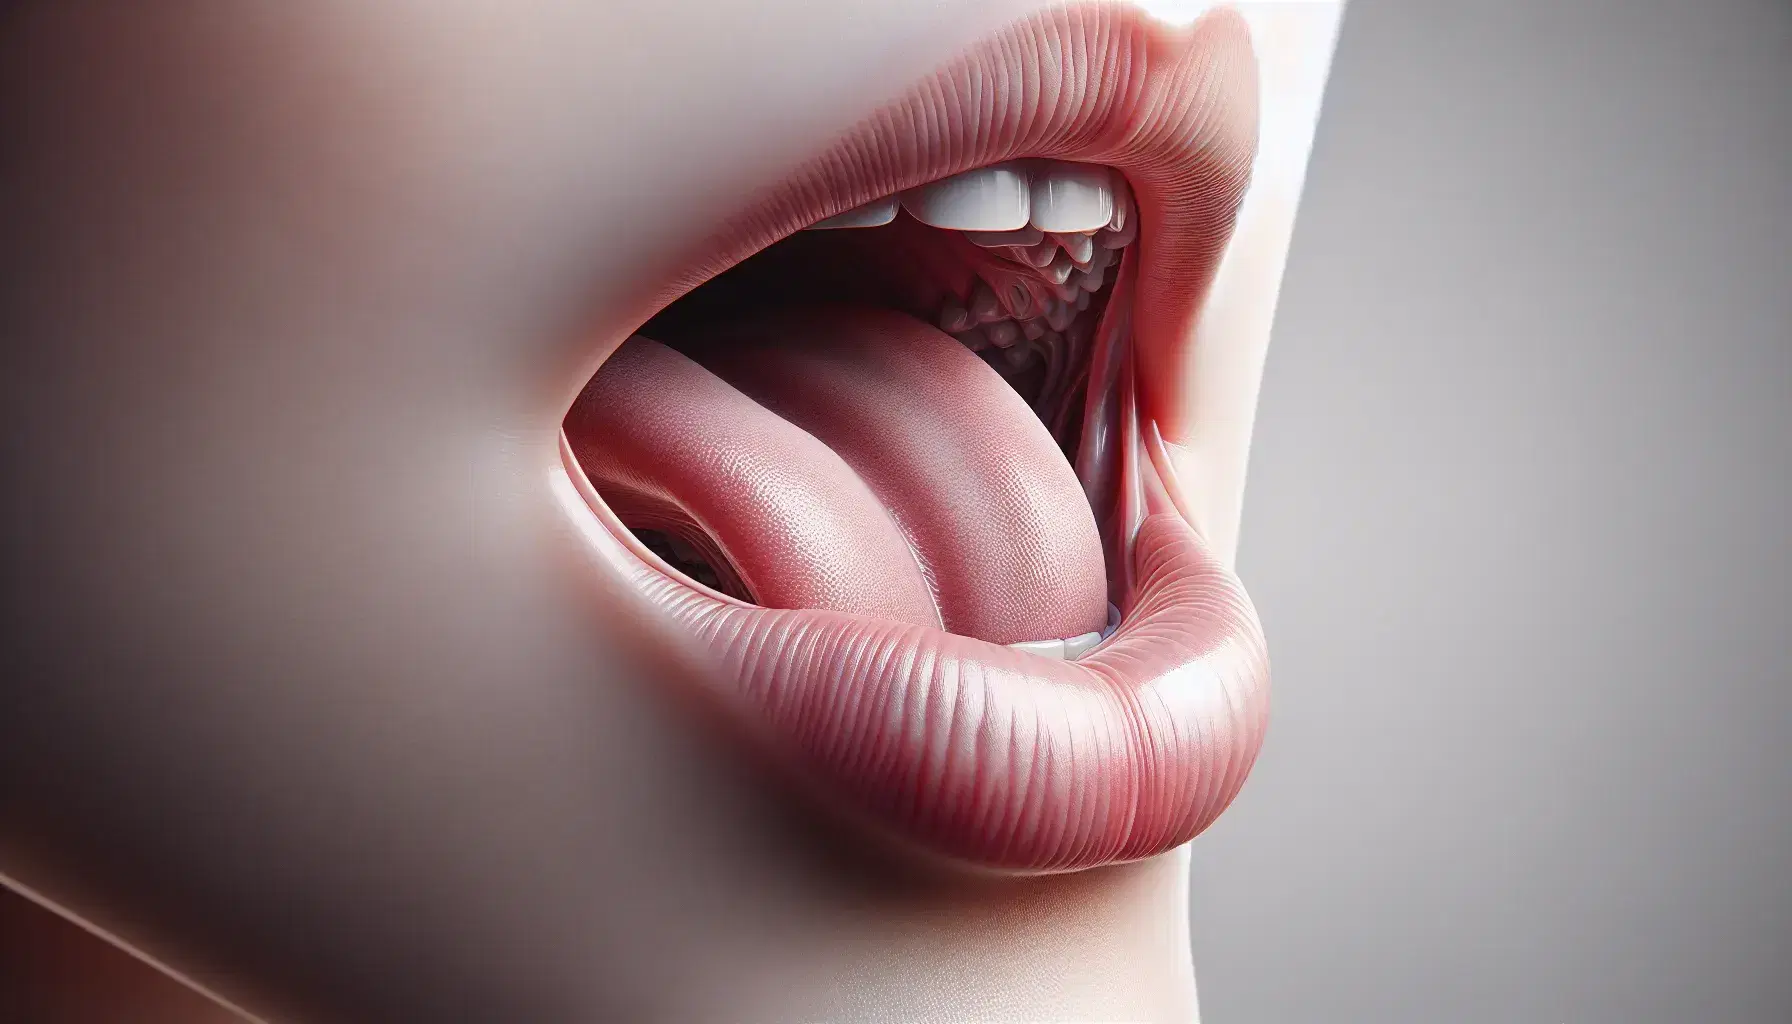 Close-up view of a human mouth with slightly parted lips, elevated tongue touching the soft palate, highlighting oral anatomy for velar consonant articulation.